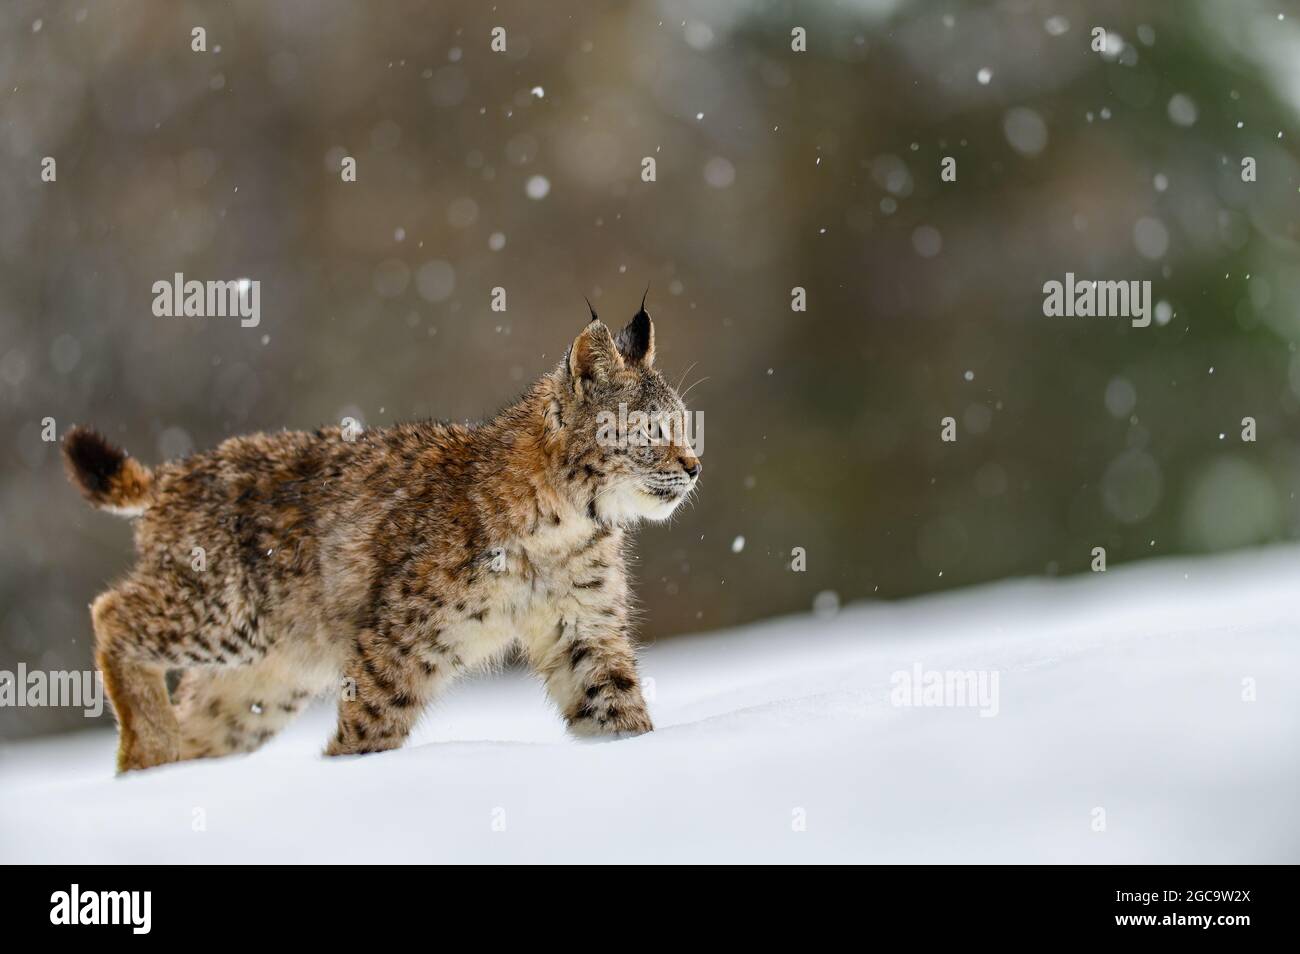 Eurasian lynx (Lynx lynx) in the winter forest in the snow, snowing. Big feline beast, young animal. Stock Photo